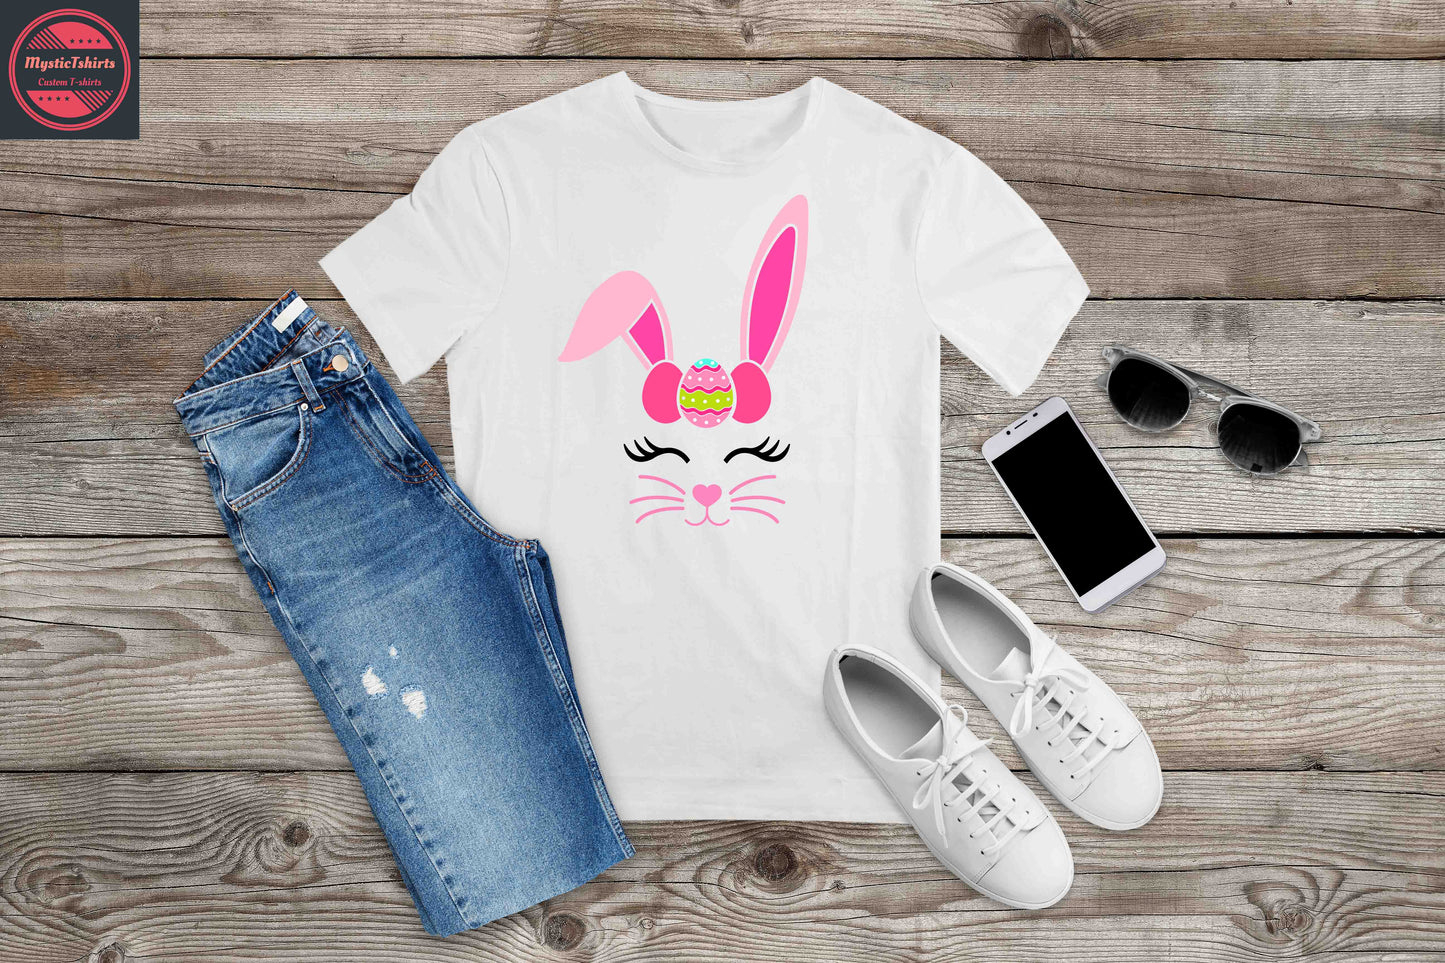 038. BUNNY FACE WITH EGG, Custom Made Shirt, Personalized T-Shirt, Custom Text, Make Your Own Shirt, Custom Tee